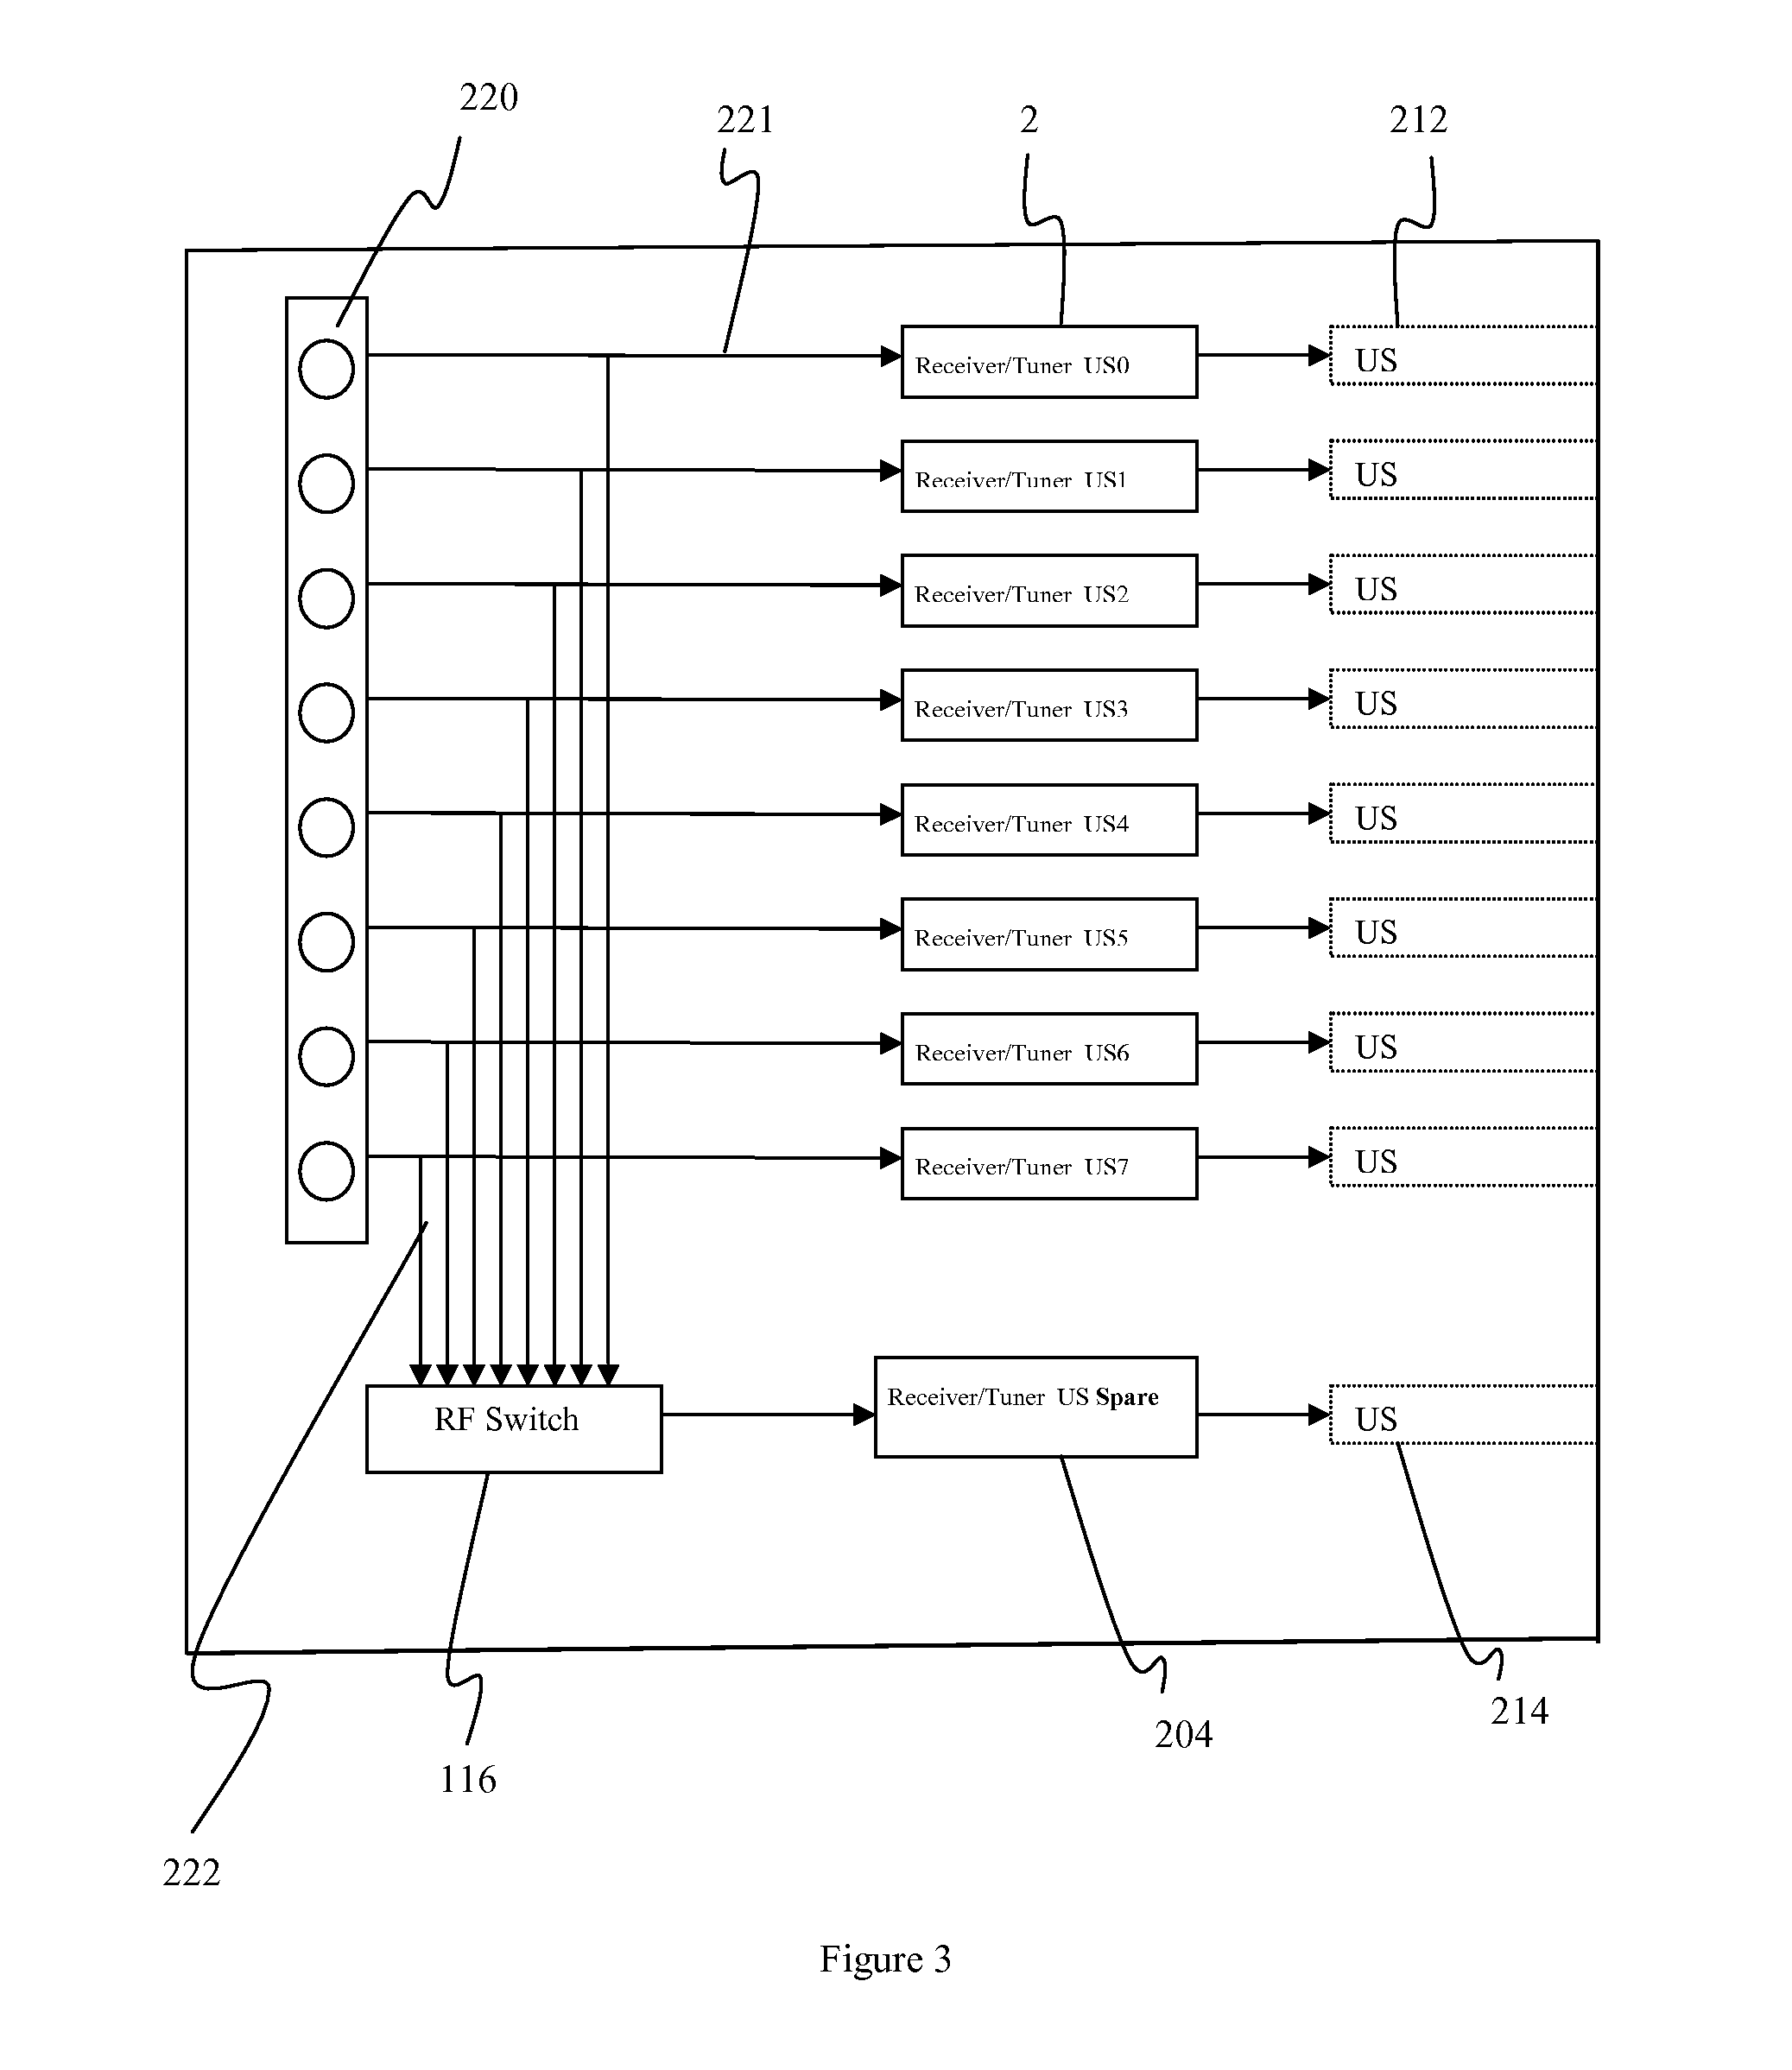 Method and apparatus for characterizing modulation schemes in an HFC network